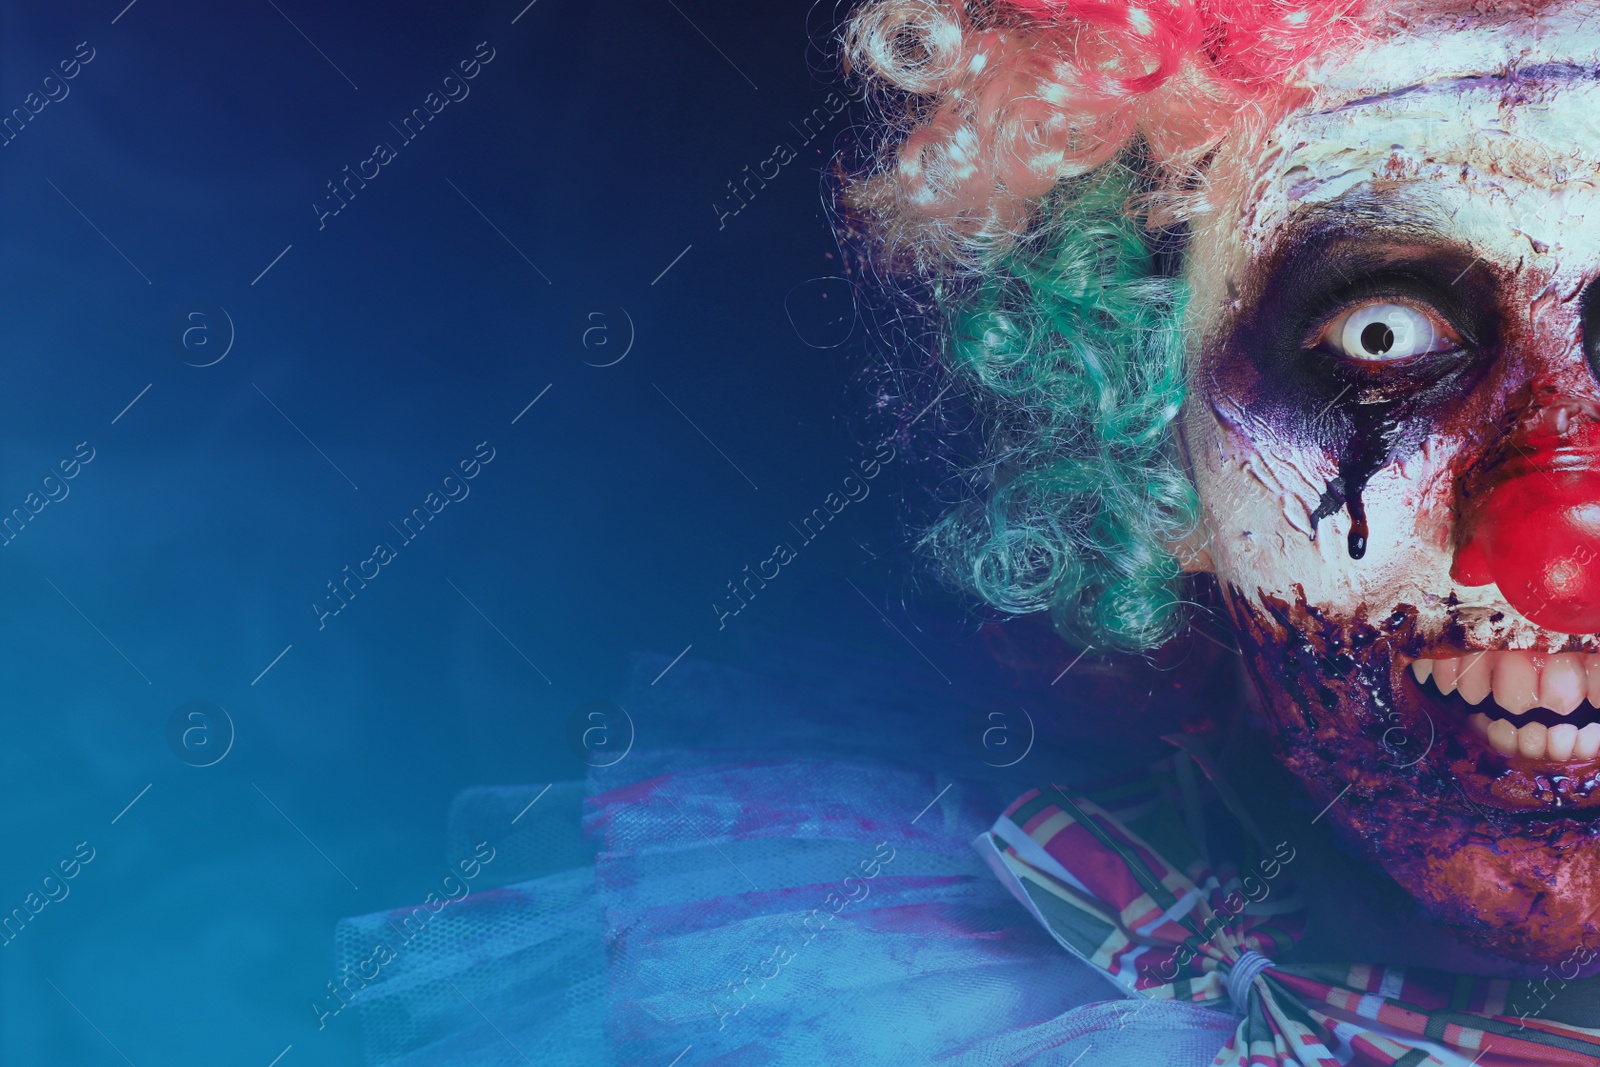 Photo of Terrifying clown on dark background, closeup with space for text. Halloween party costume